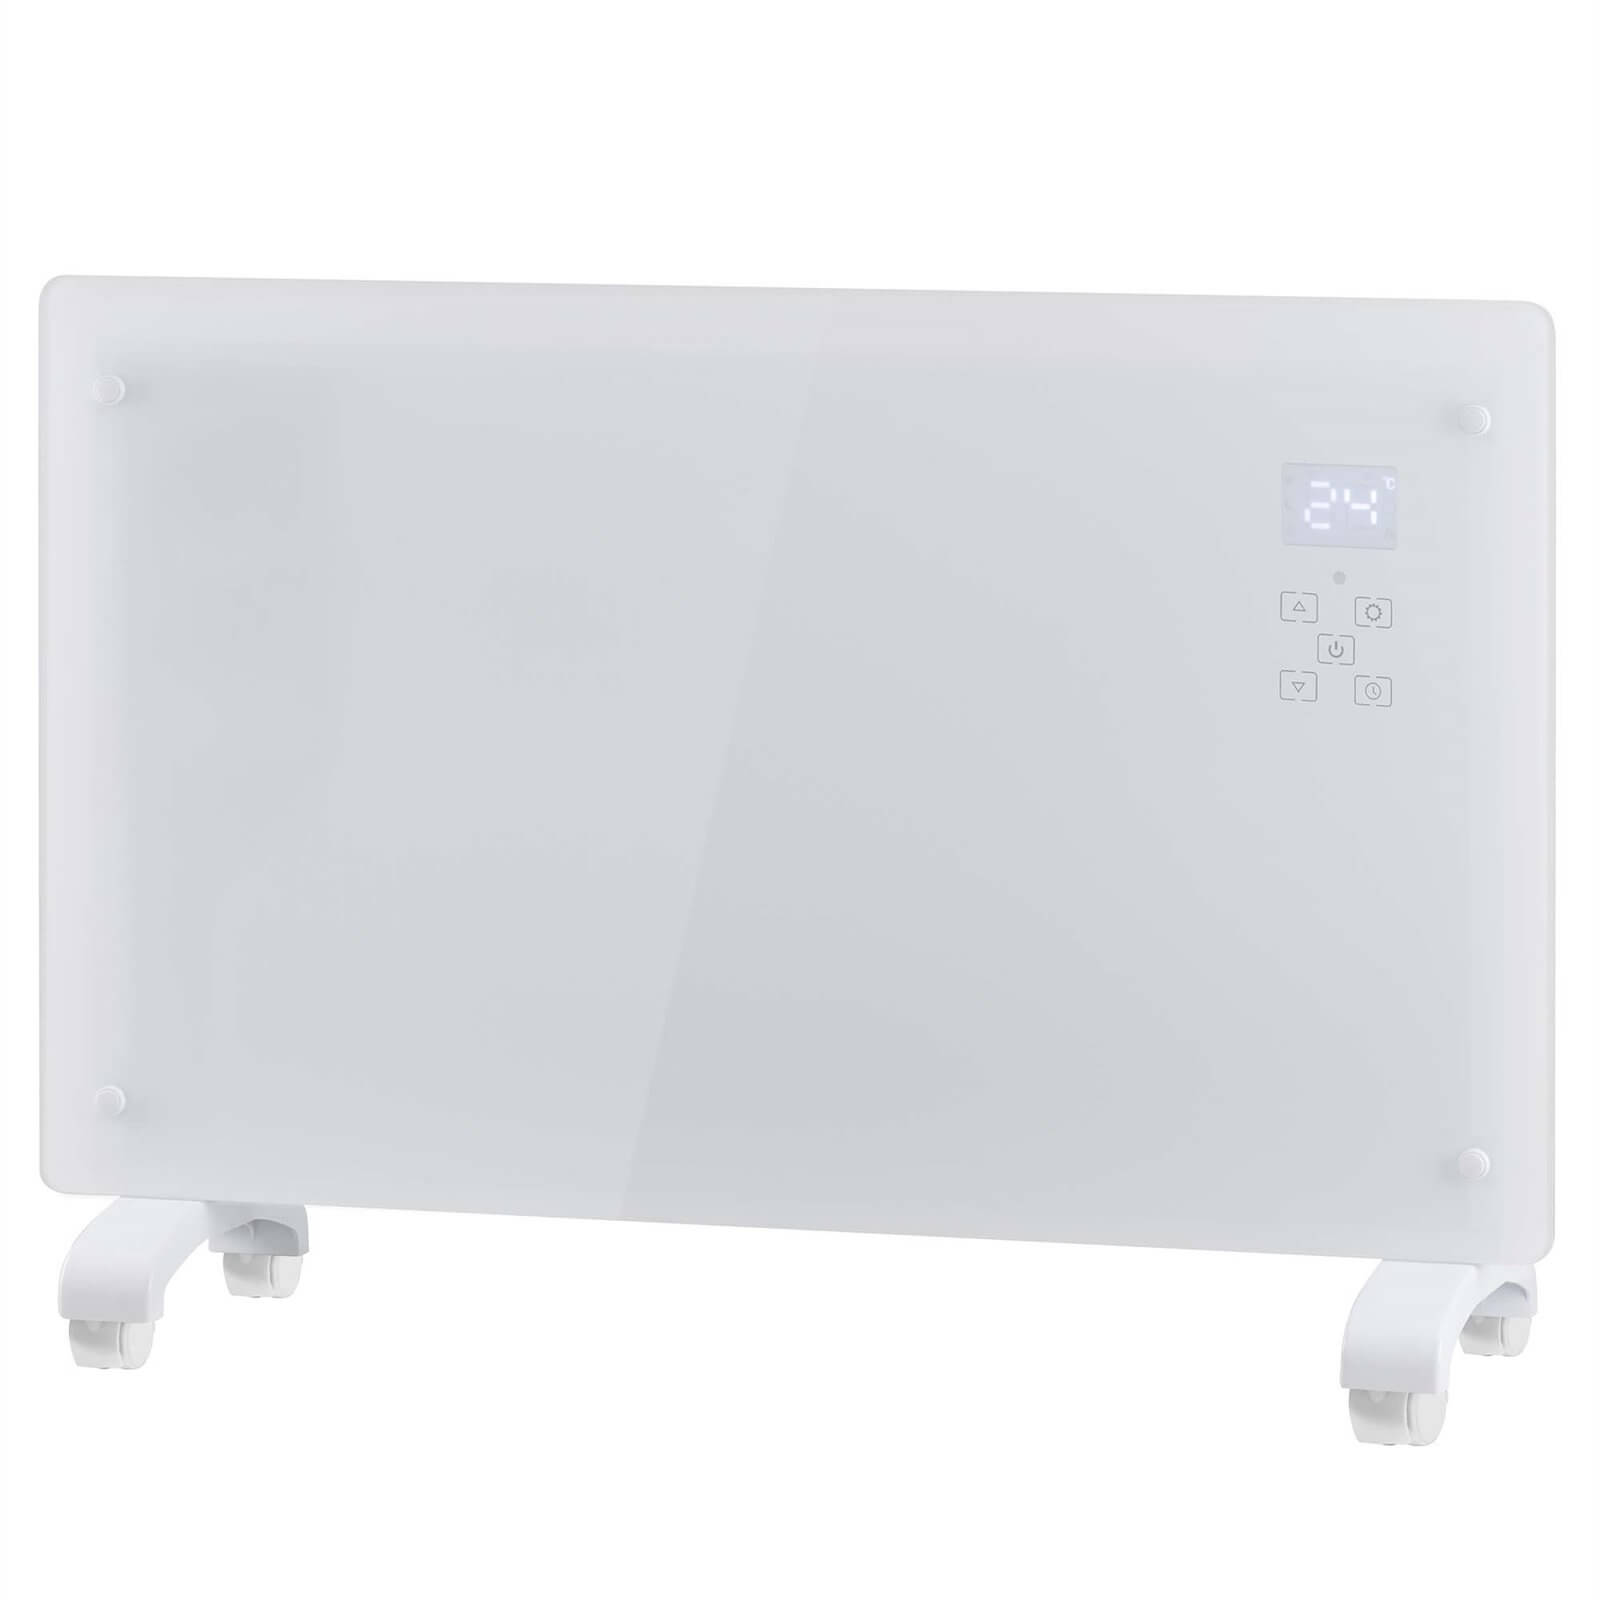 Arlec Electric Panel Heater Glass with Timer in White - 2200W